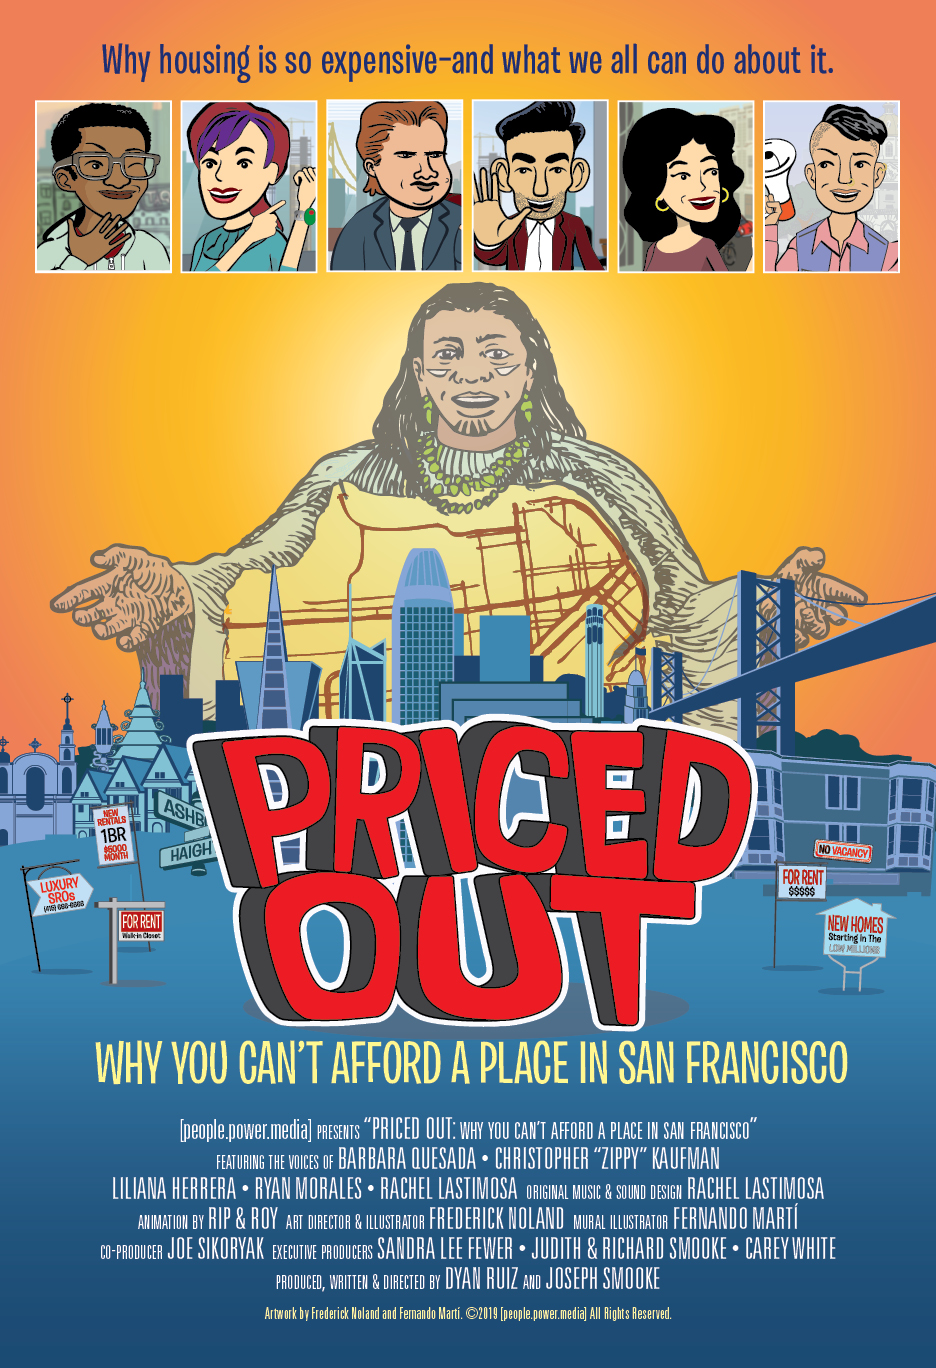 Priced Out: Why You Can't Afford a Place in San Francisco